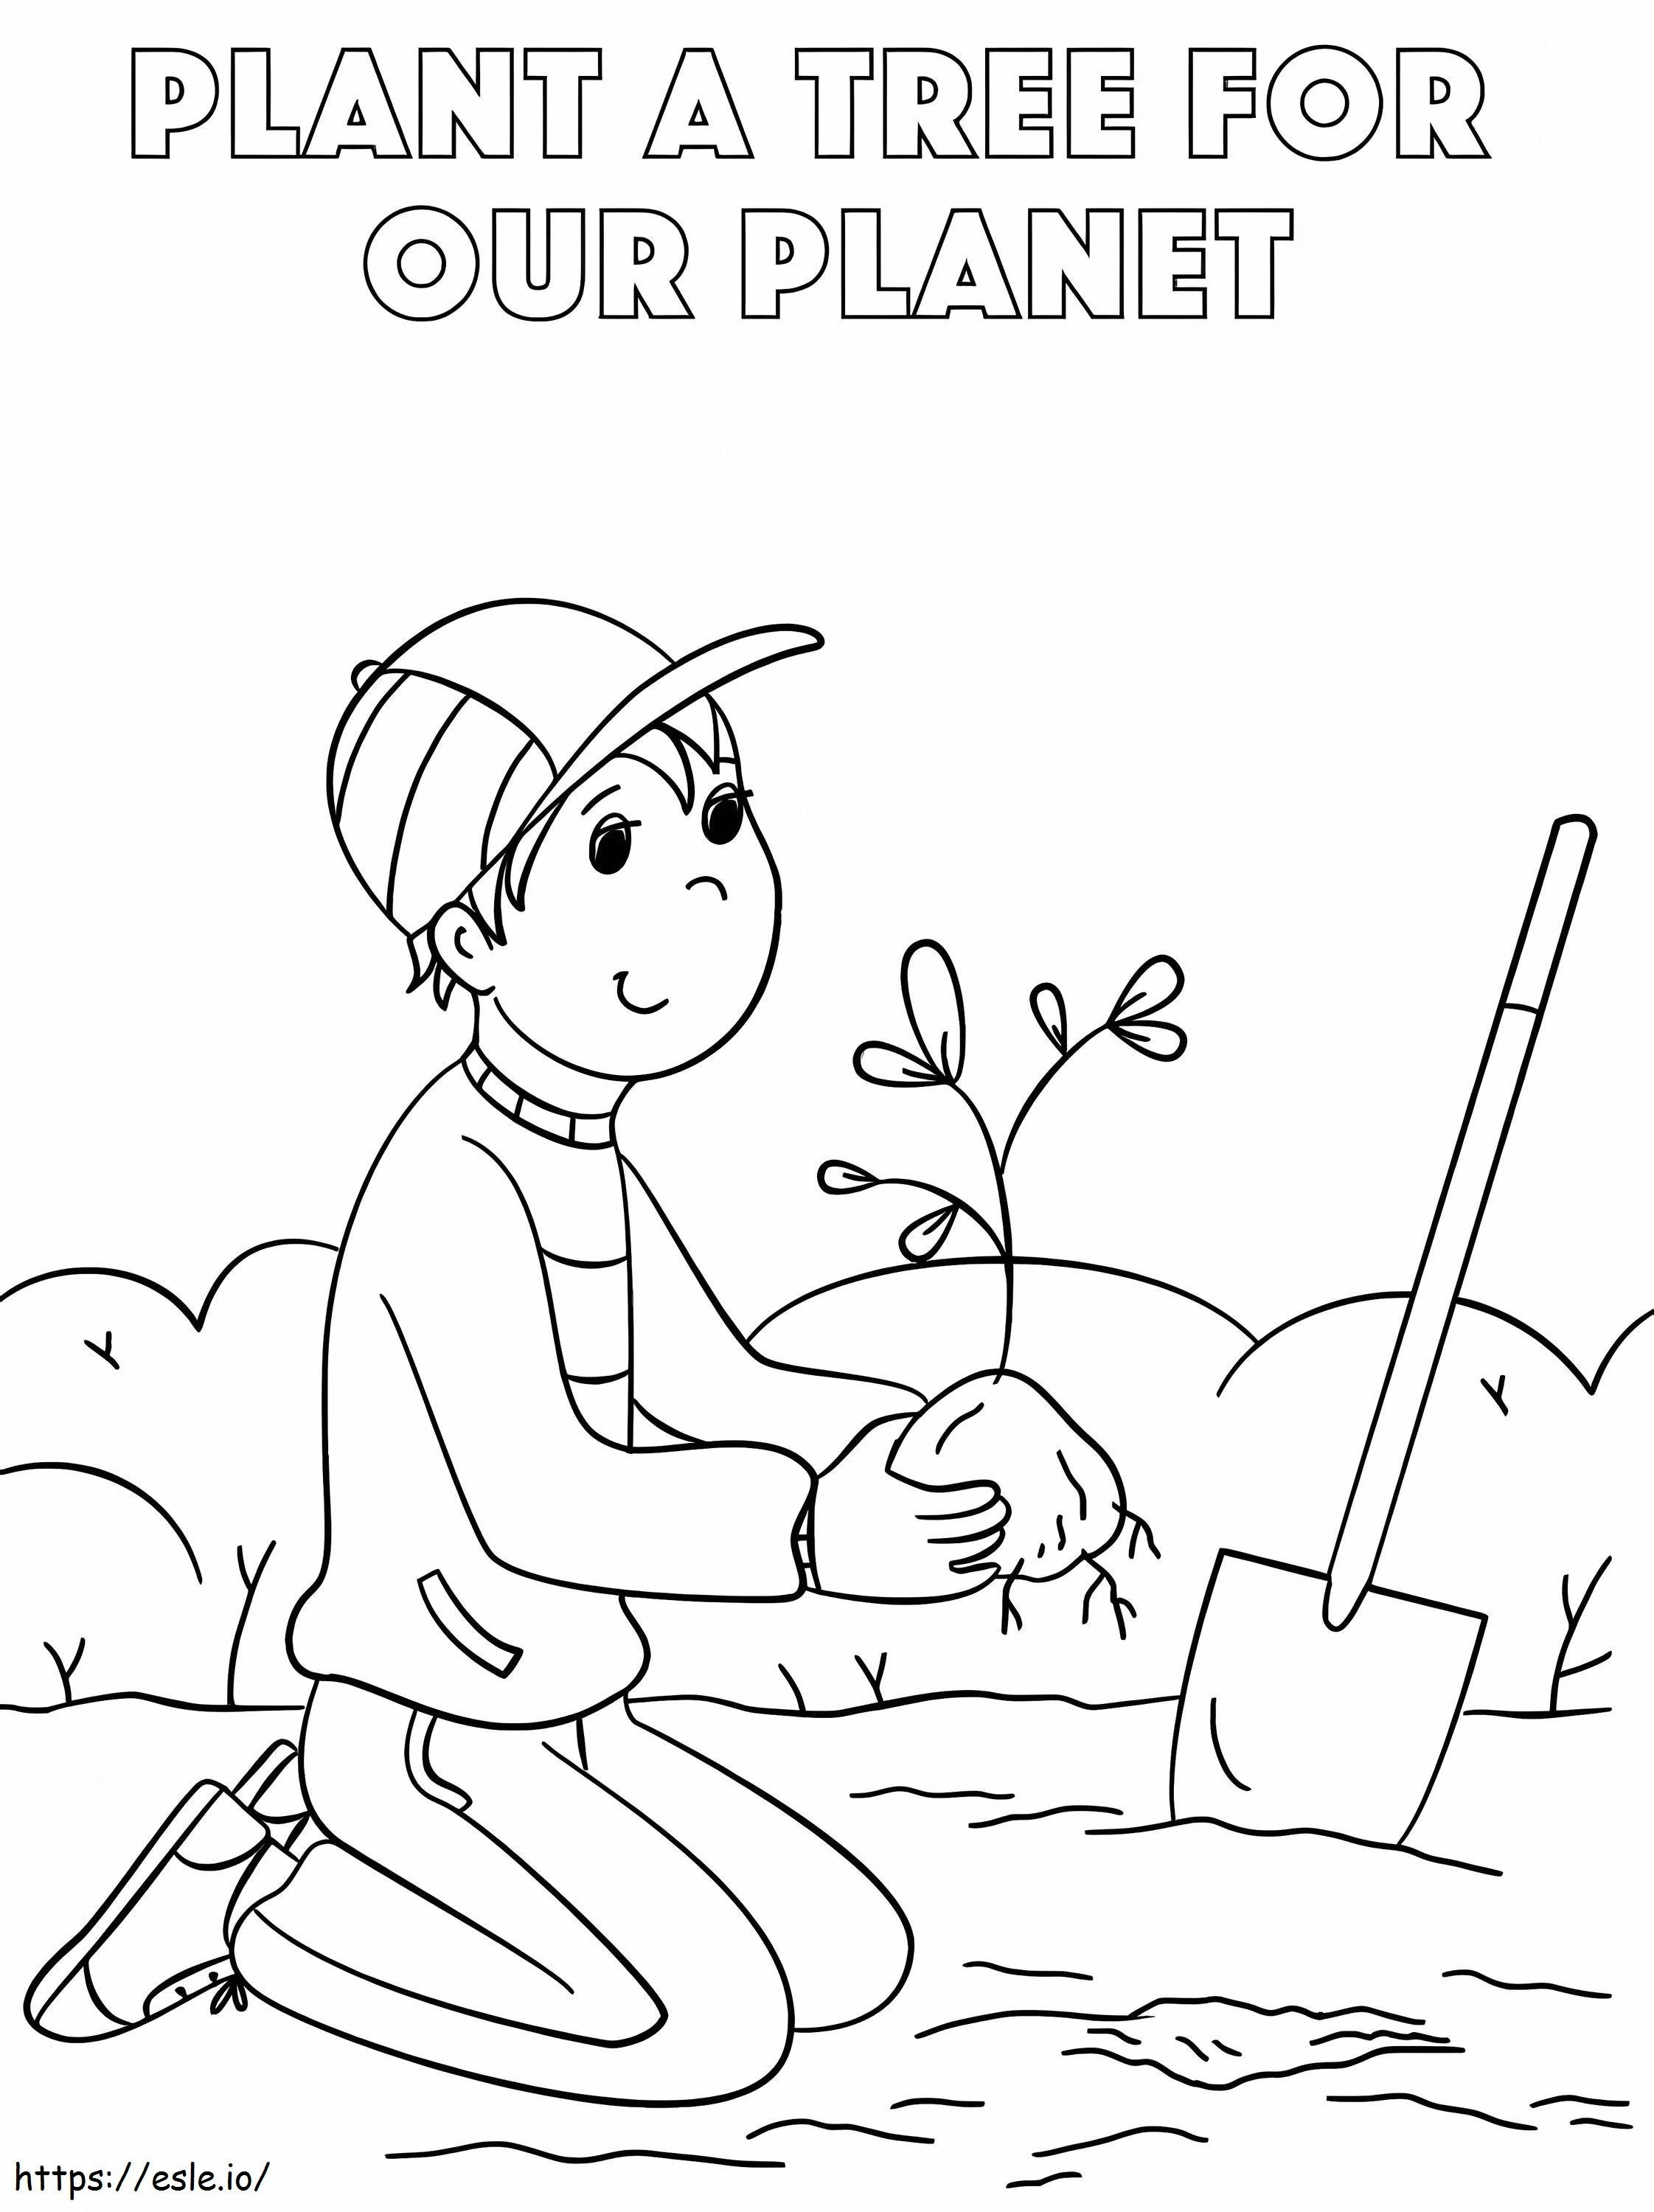 Plant A Tree coloring page